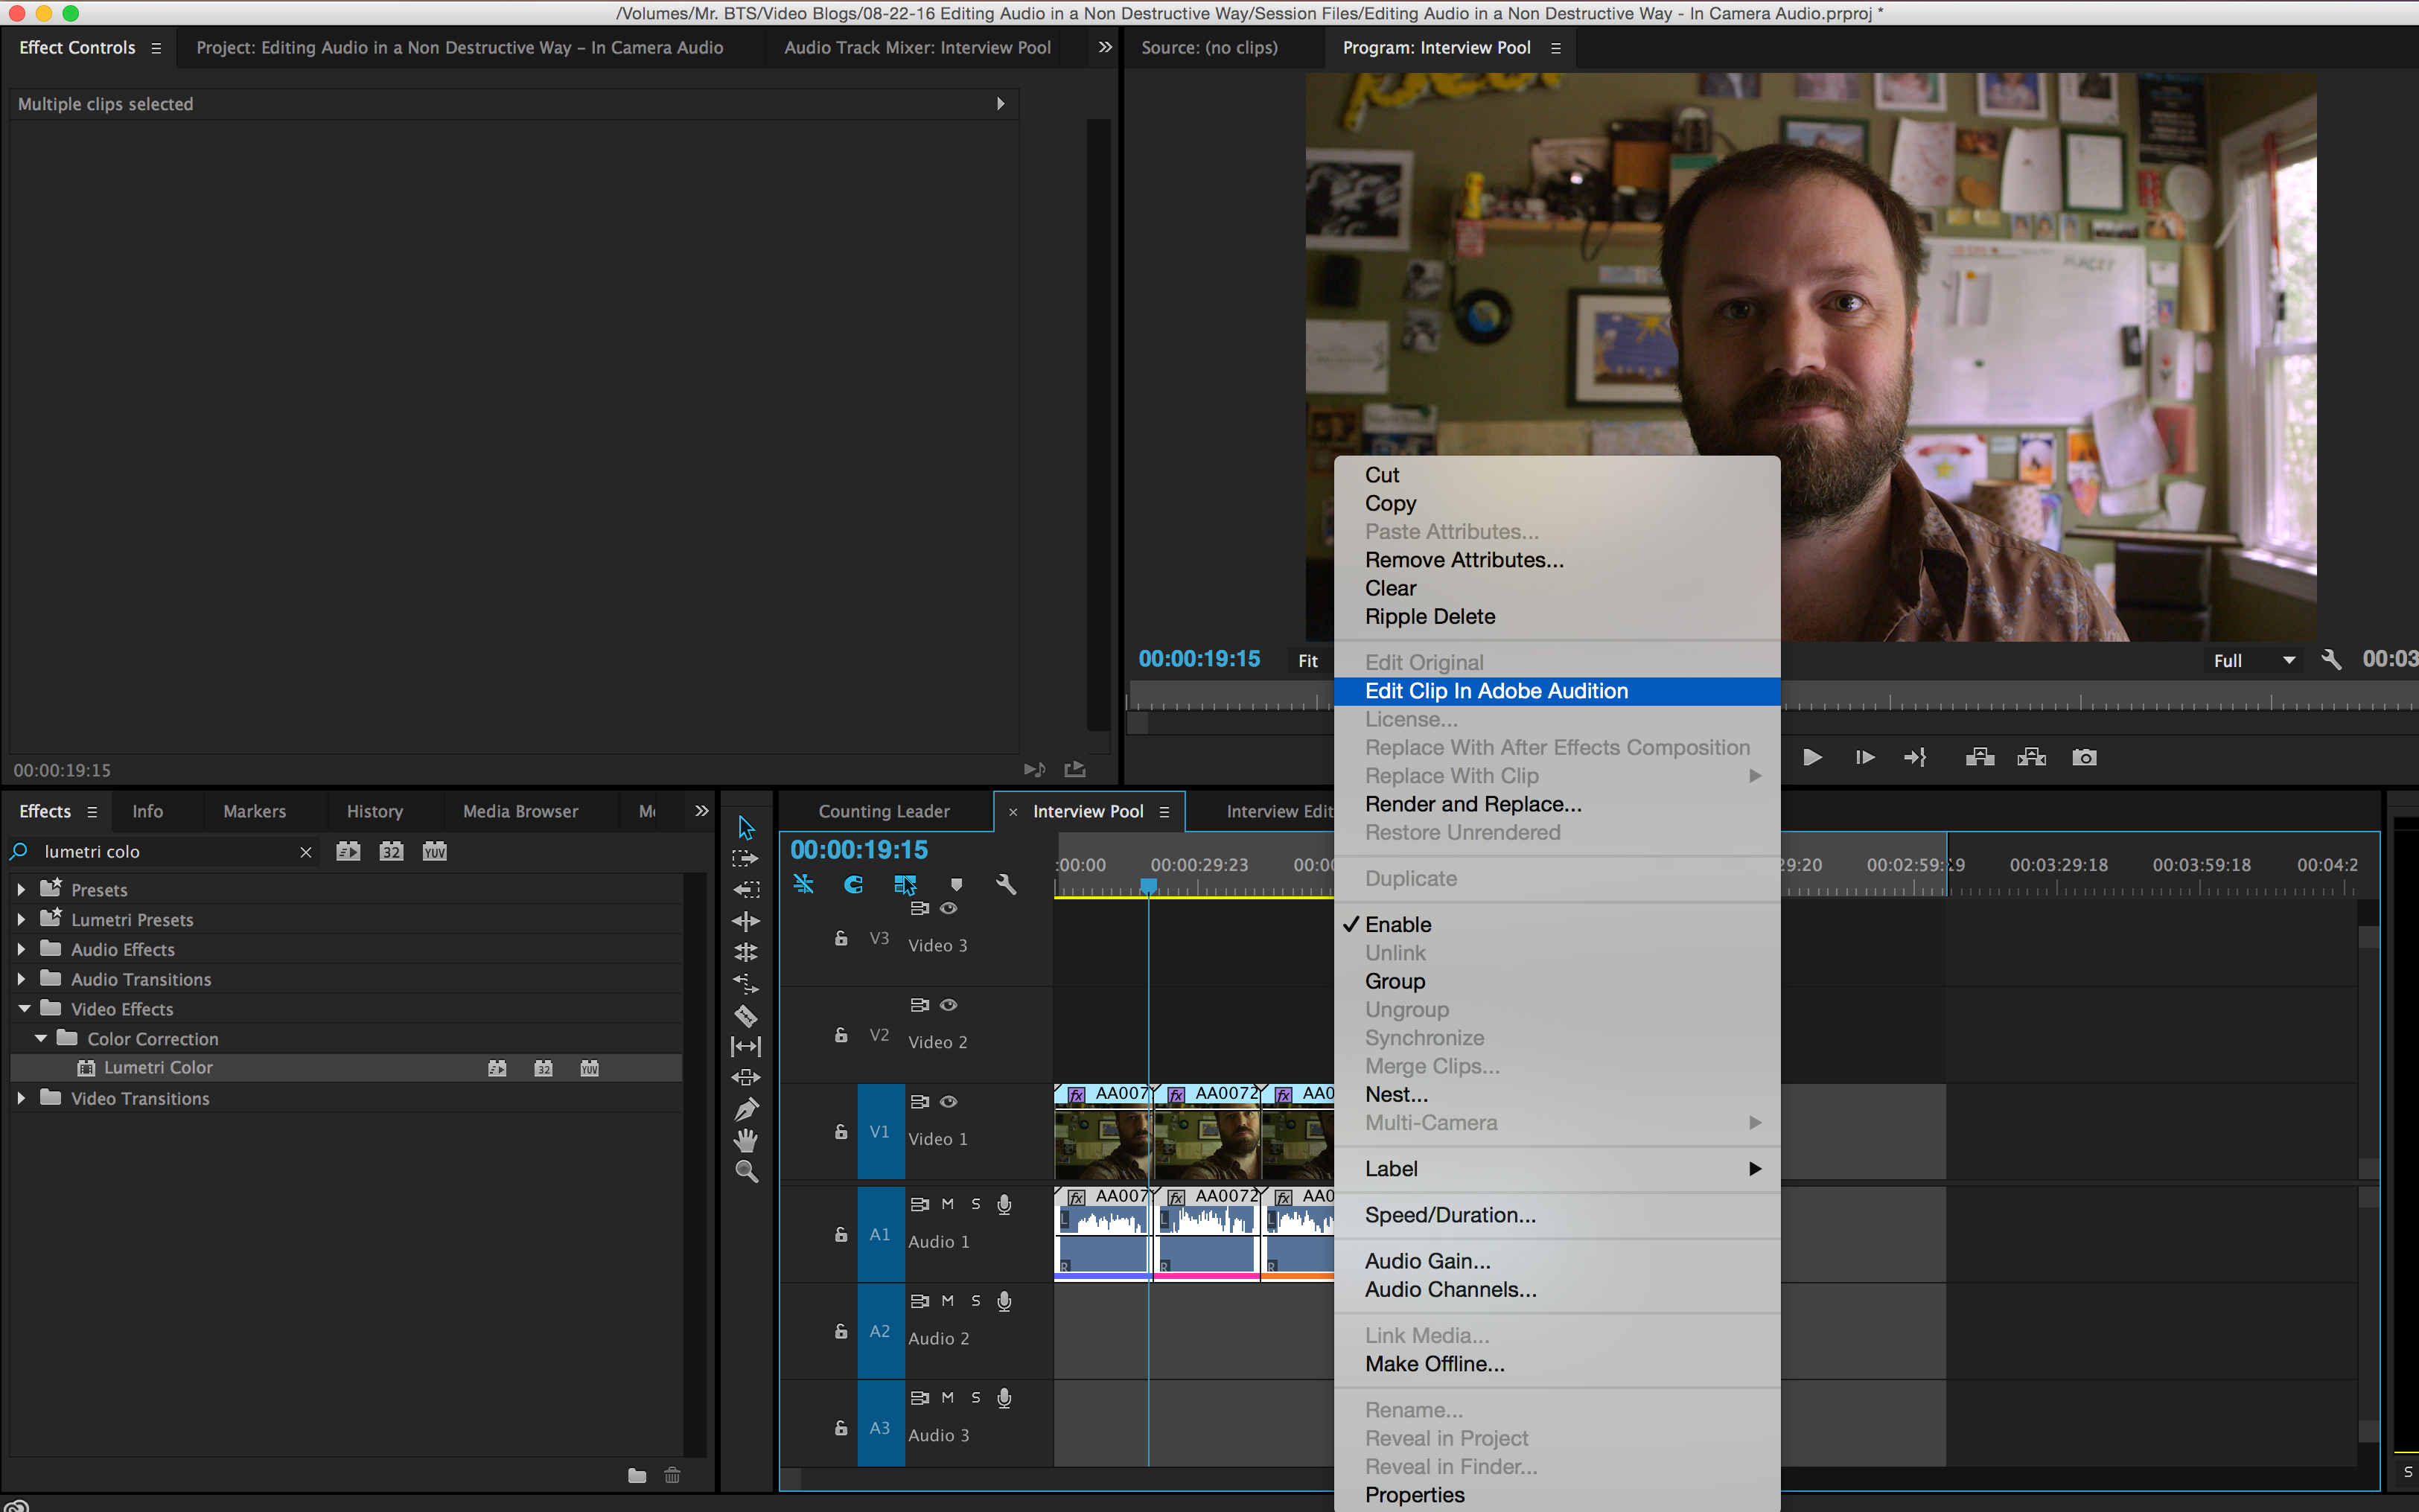 How to Simultaneously Edit Multiple Internal Camera Audio Files: Edit Clip in Adobe Audition